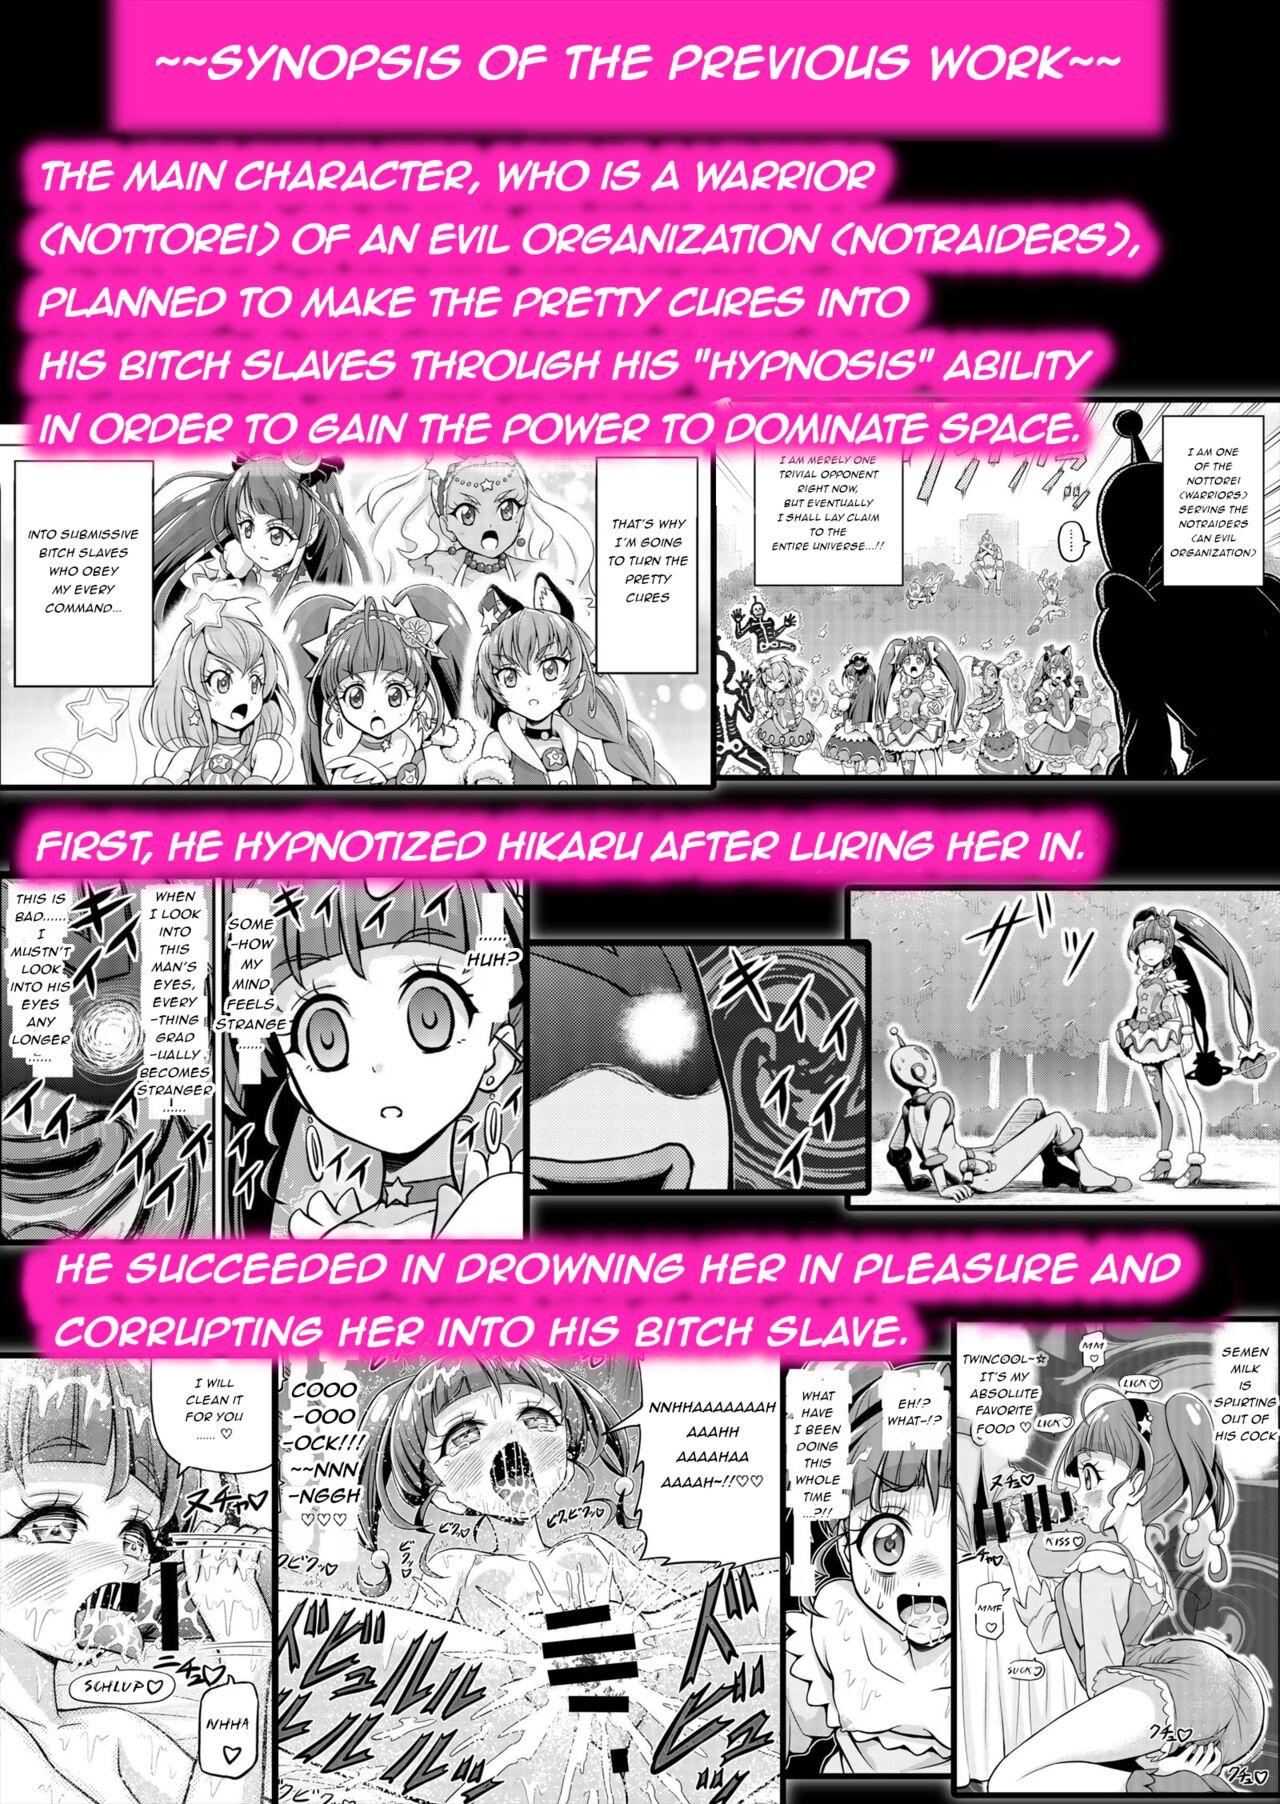 Firsttime Hoshi Asobi 2 | Star Playtime 2 Ch. 1-3 - Star twinkle precure Jerk Off - Page 2